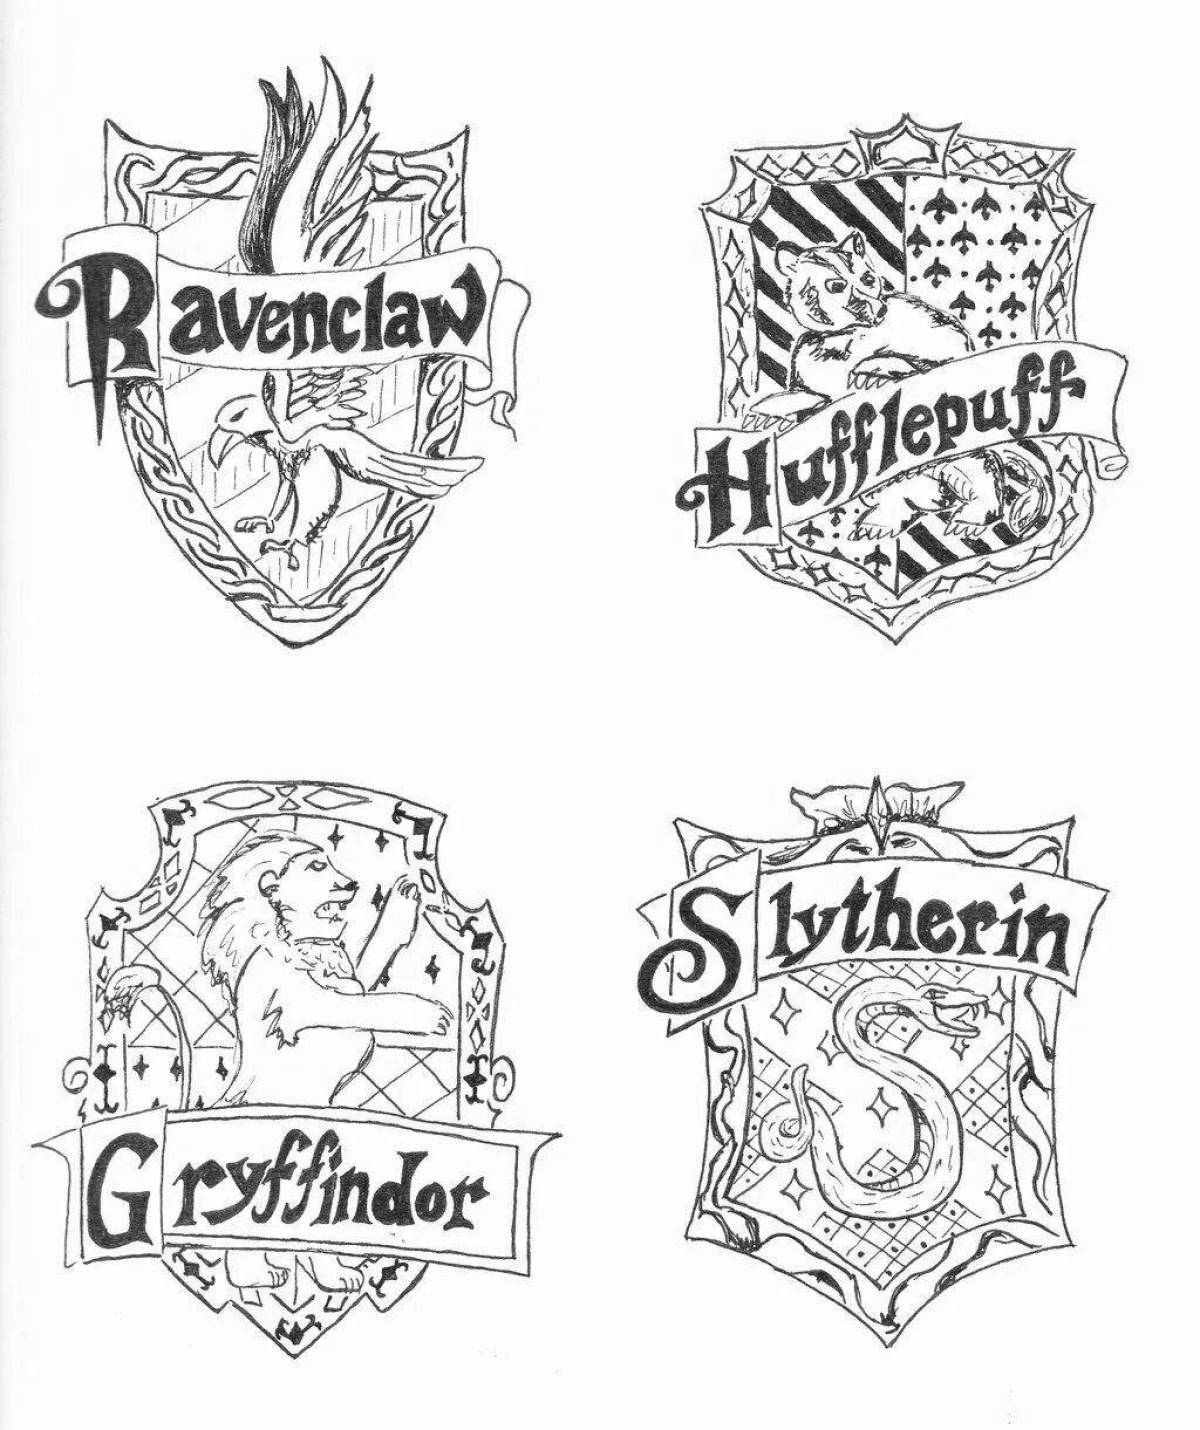 Ravenclaw's playful coloring page